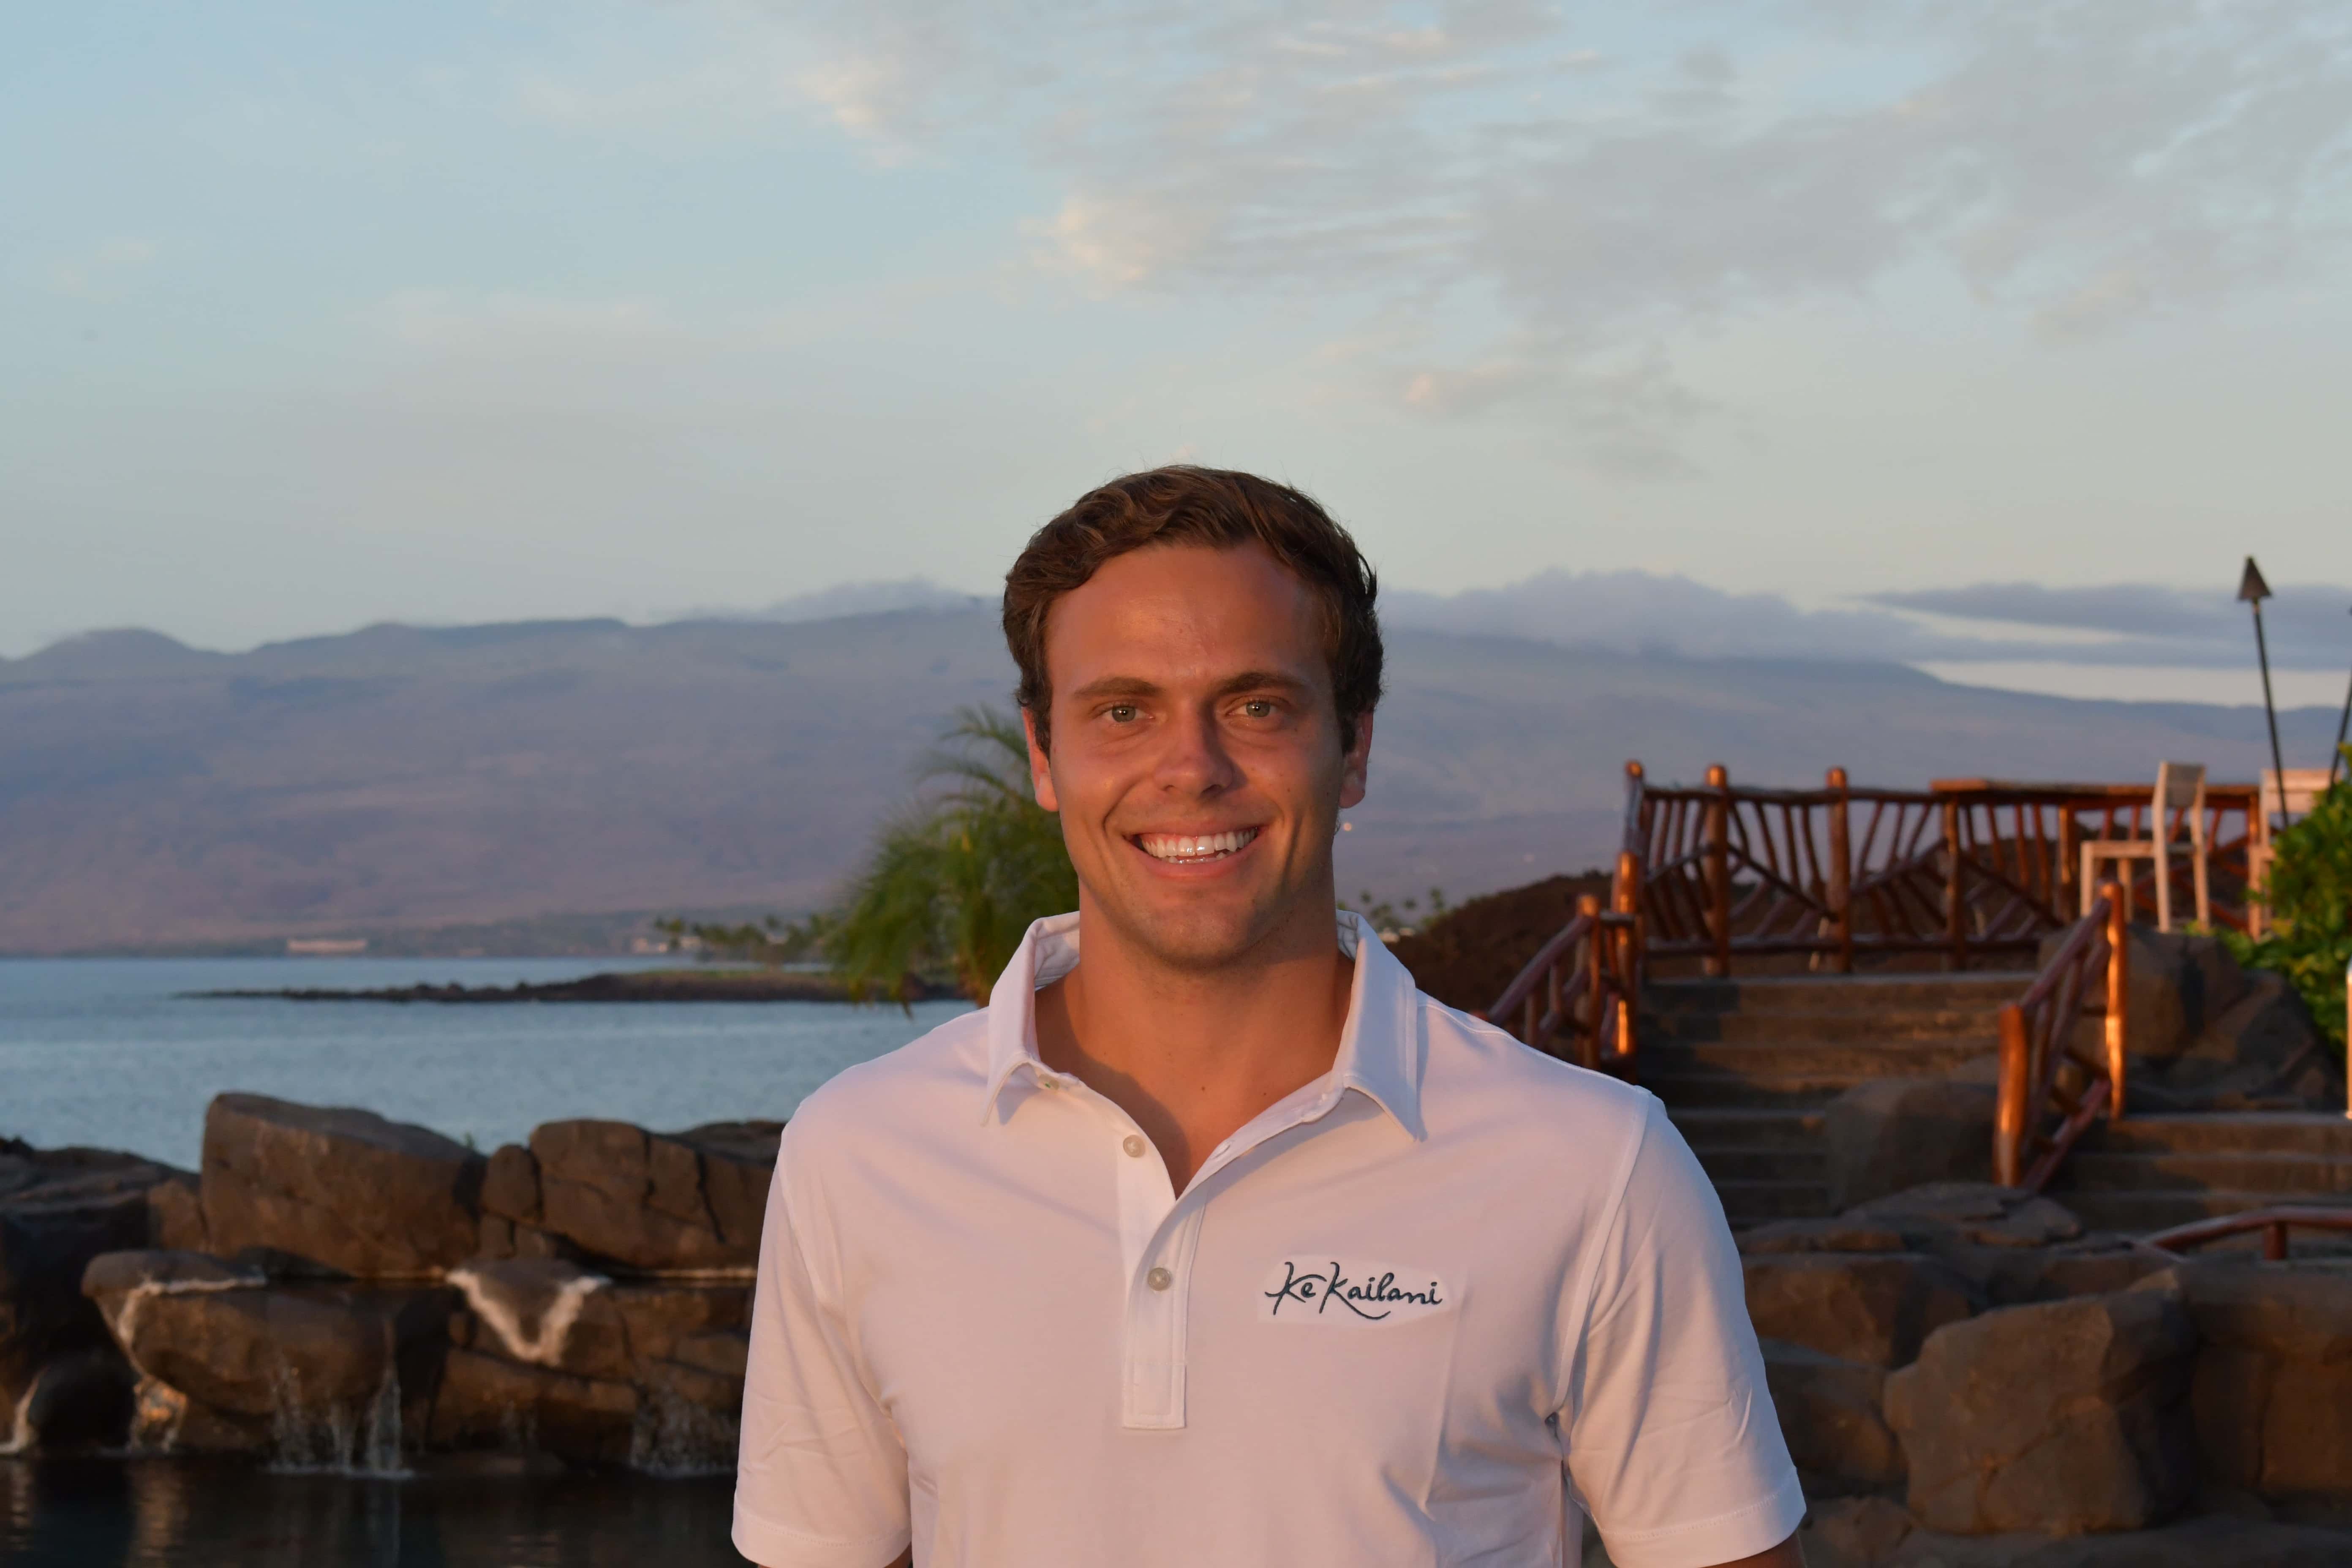 man in white shirt smiling with ocean in background